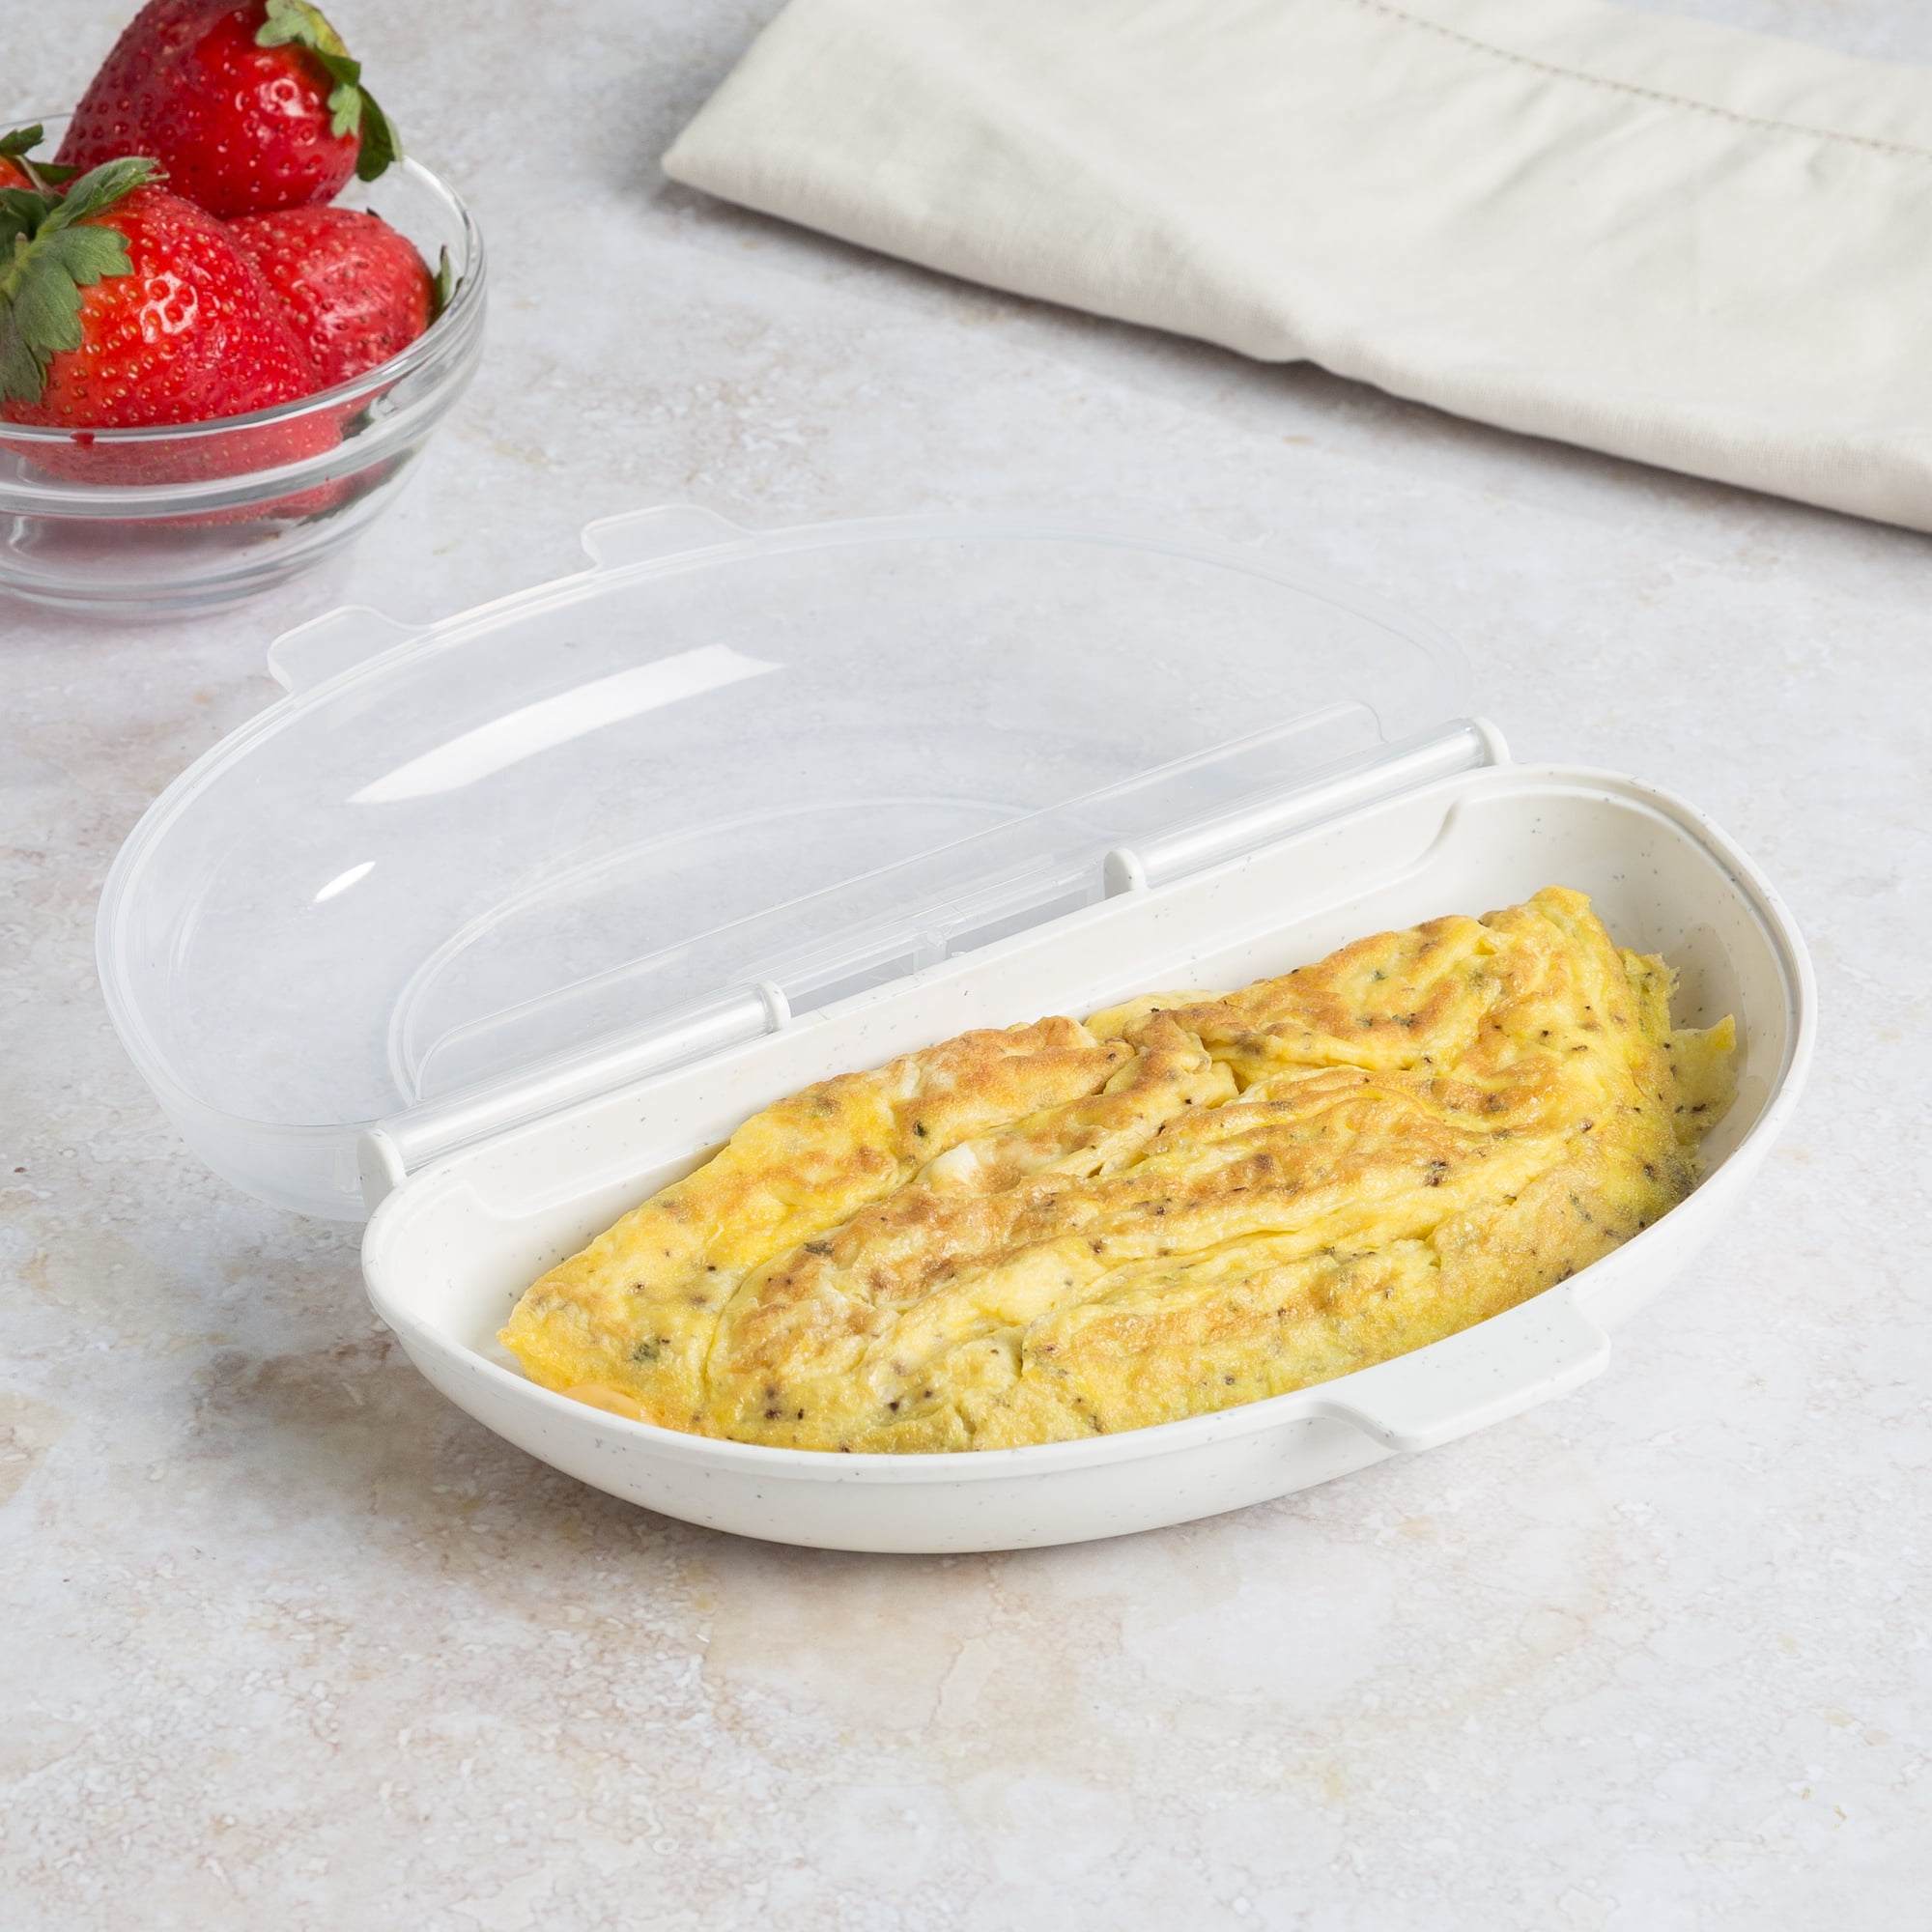 Kitchen HQ 2-pack Microwave Egg Cooker and Omelet Sets - 20625188